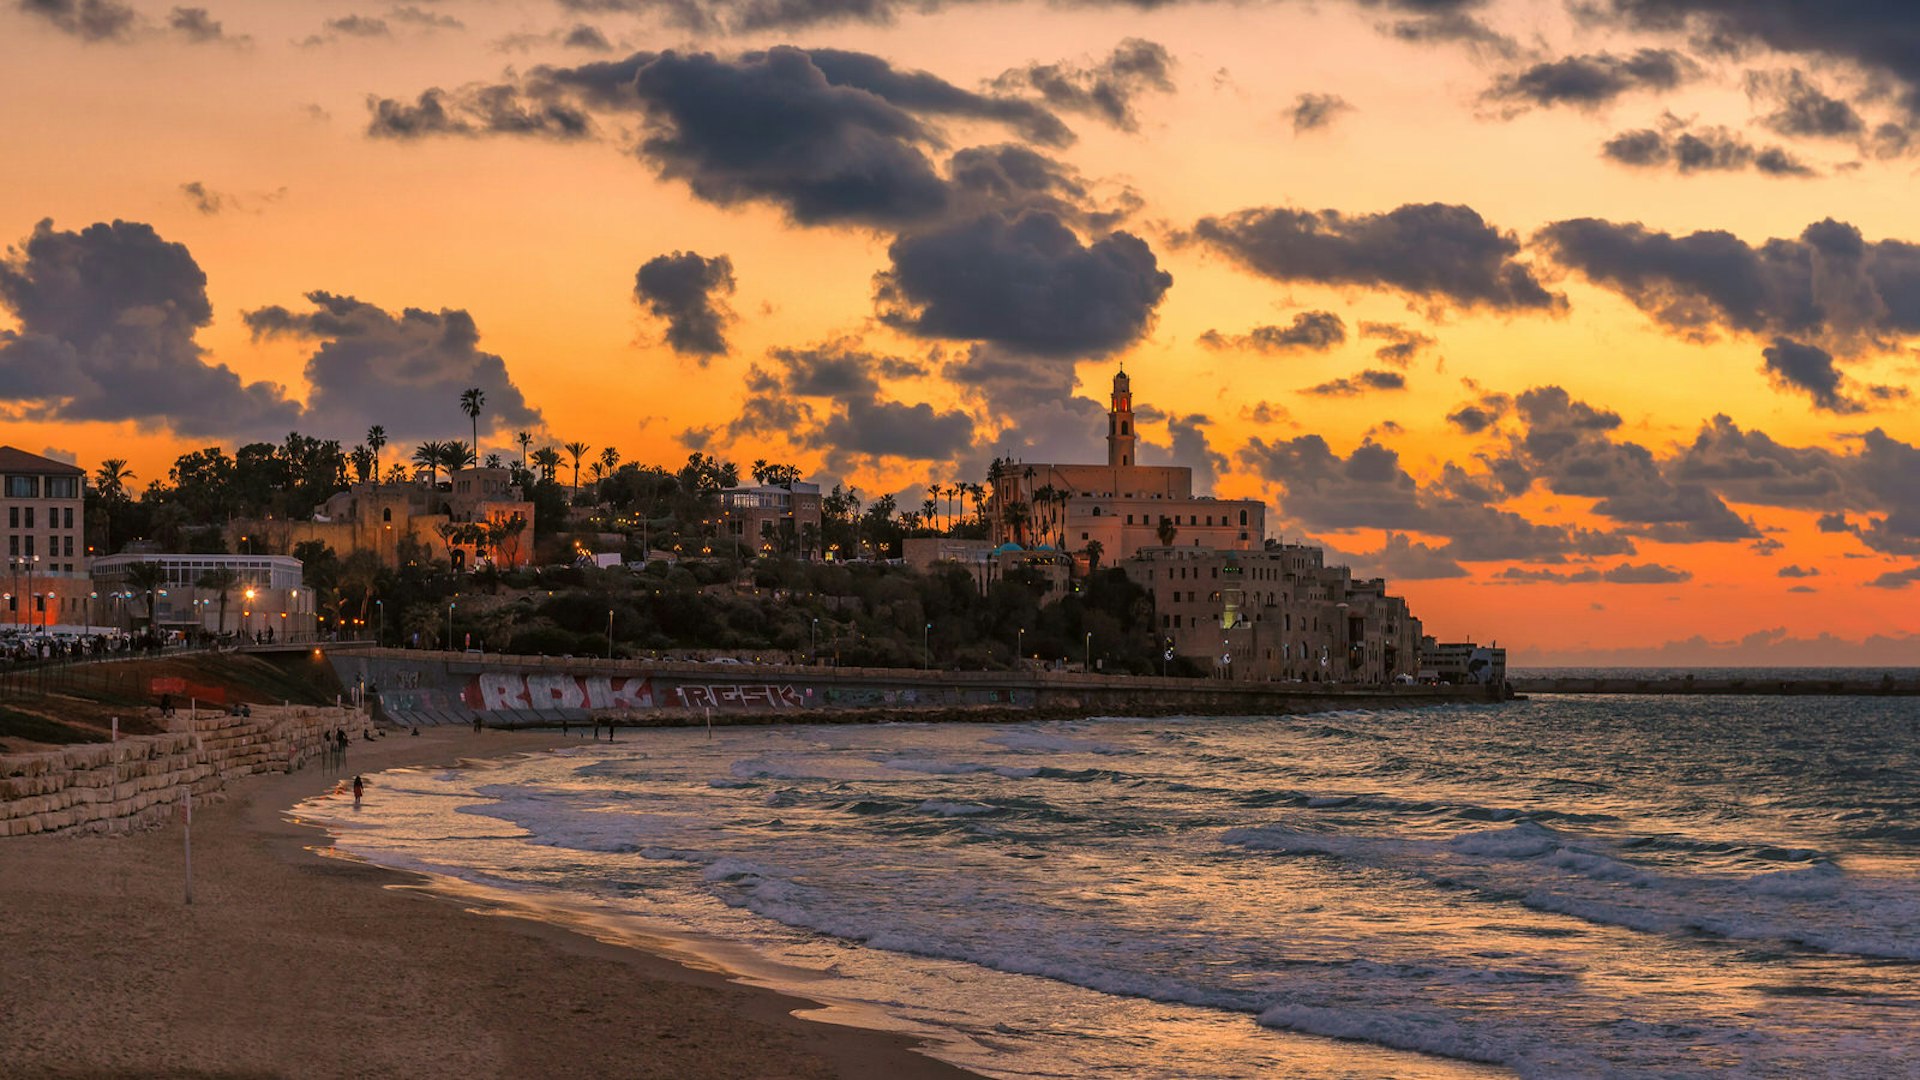 View from Jaffa, Tel Aviv, of a vivid orange sky as the sun sets over a headland covered in trees with a church at the far end.